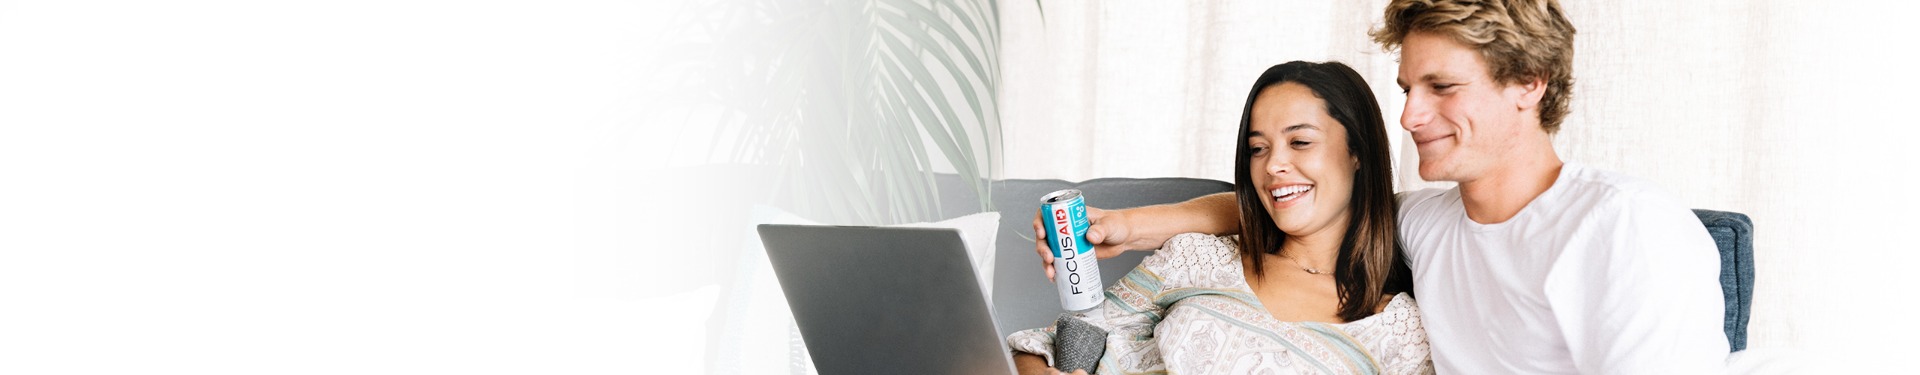 lifestyle header image of couple relaxing at home on their couch with a can of FOCUSAID, while perusing the internet together on their laptop